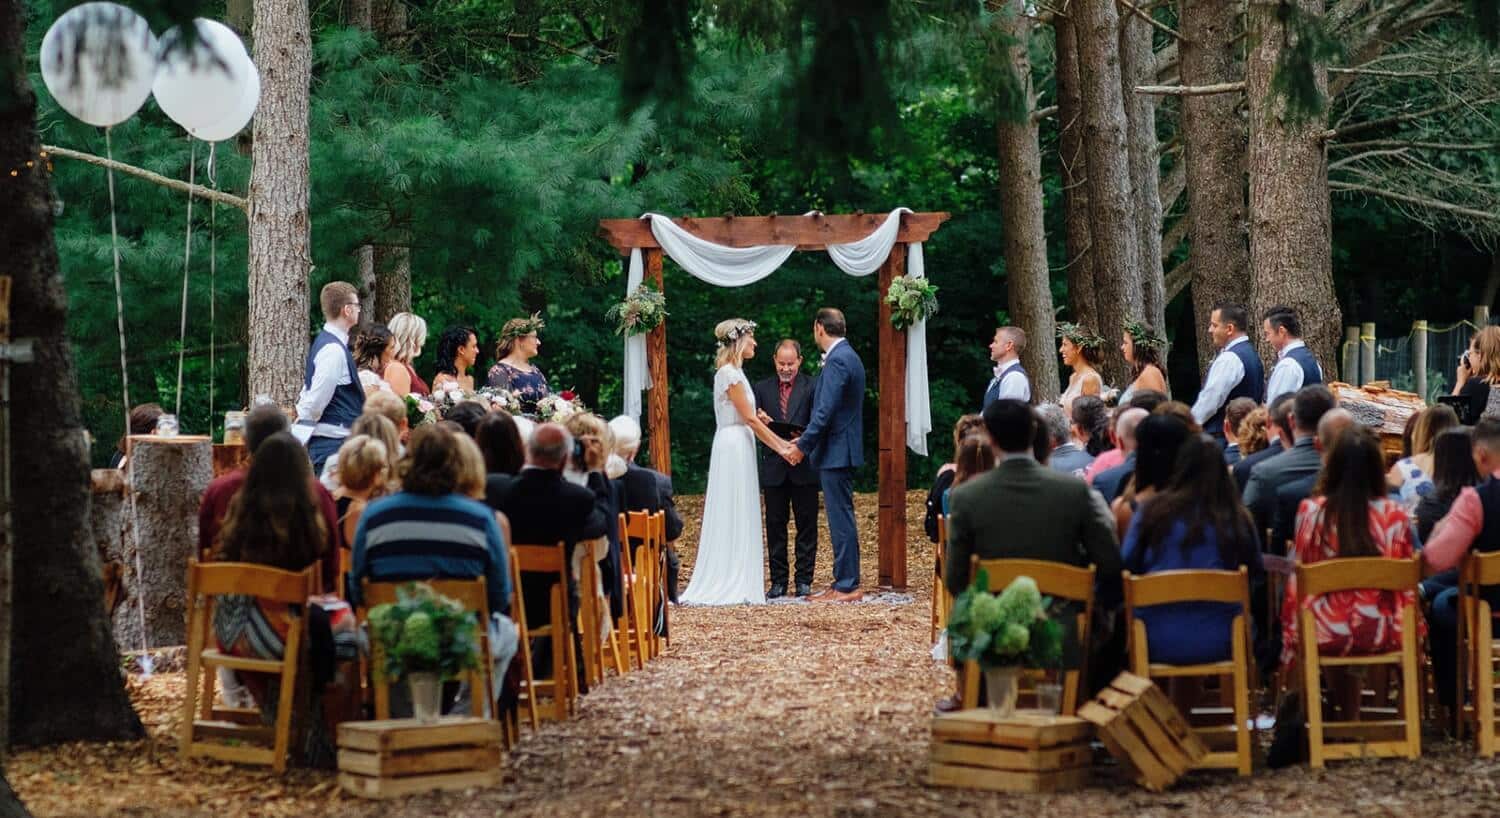 A bride and groom standing under a wooden arch with a small group of guests surrounded by woods